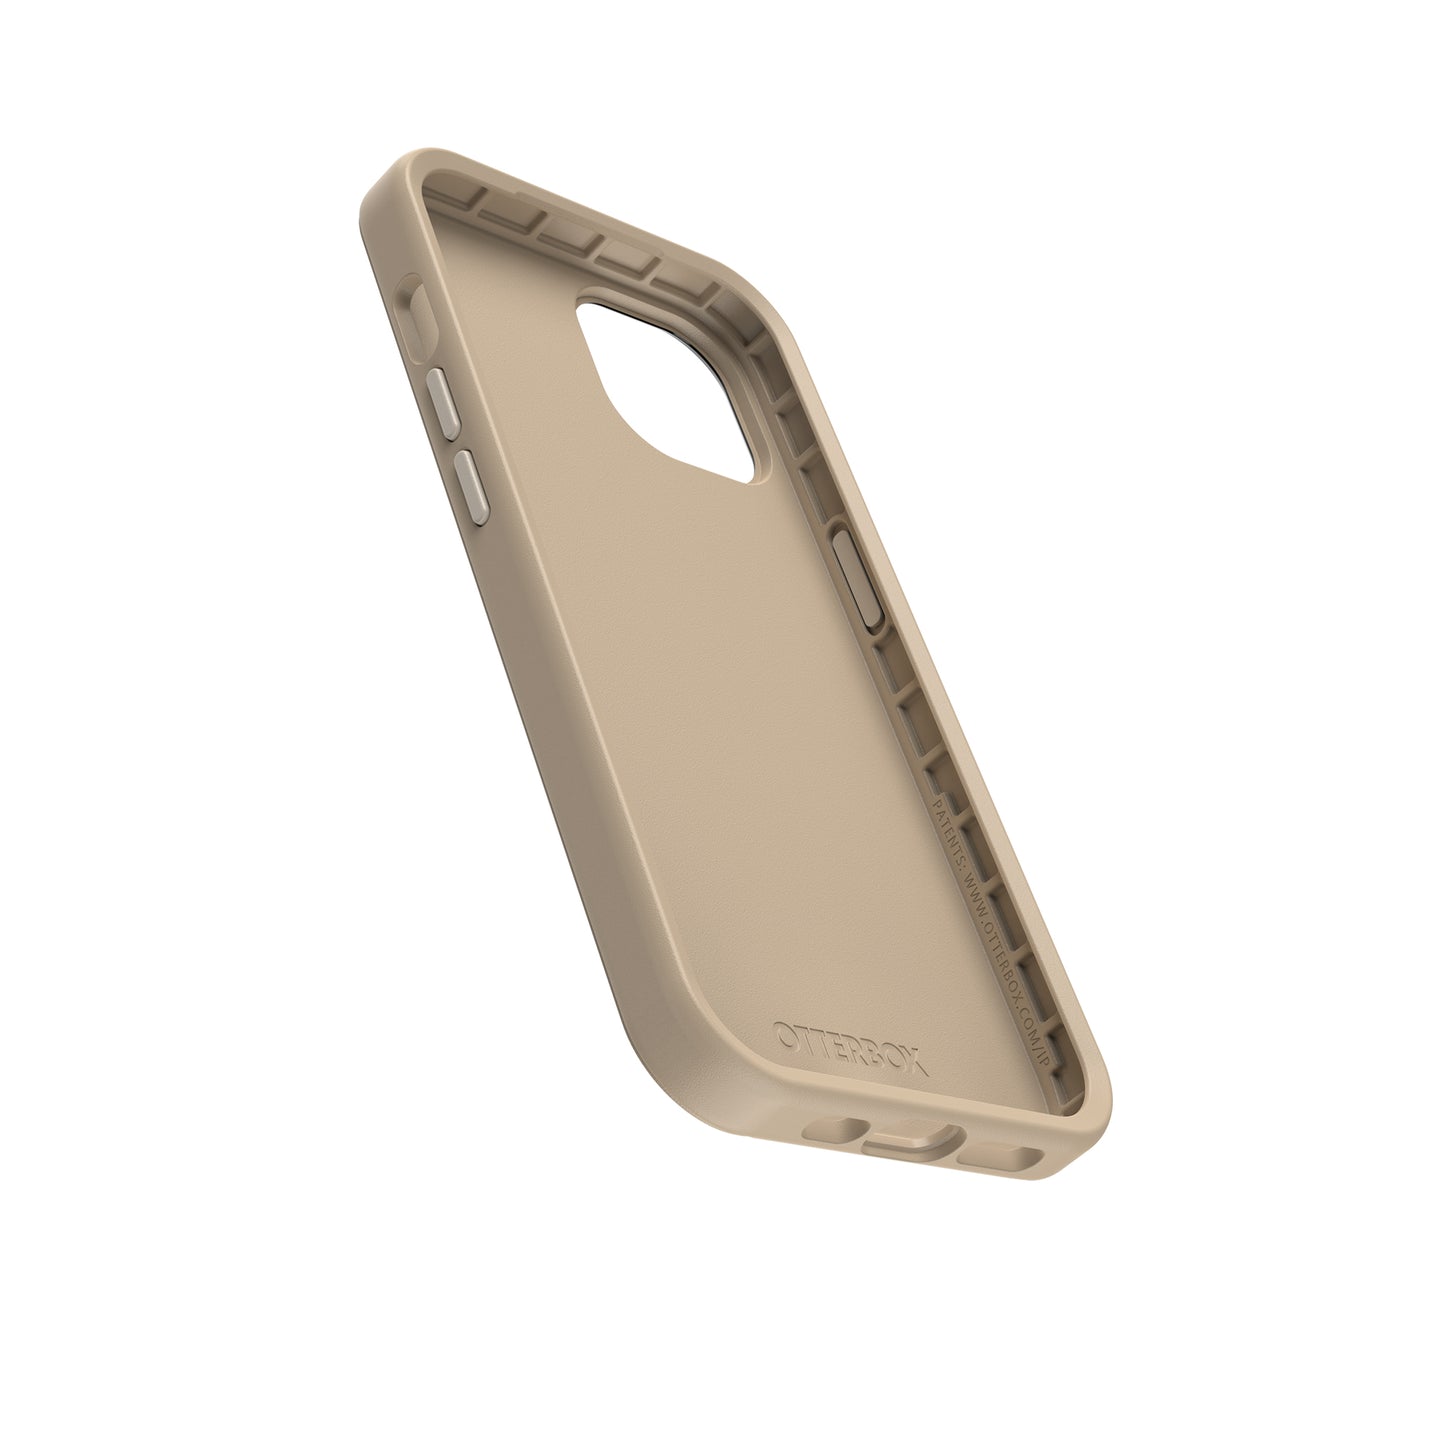 OTTERBOX Symmetry Case for iPhone 14 - Don't Even Chai